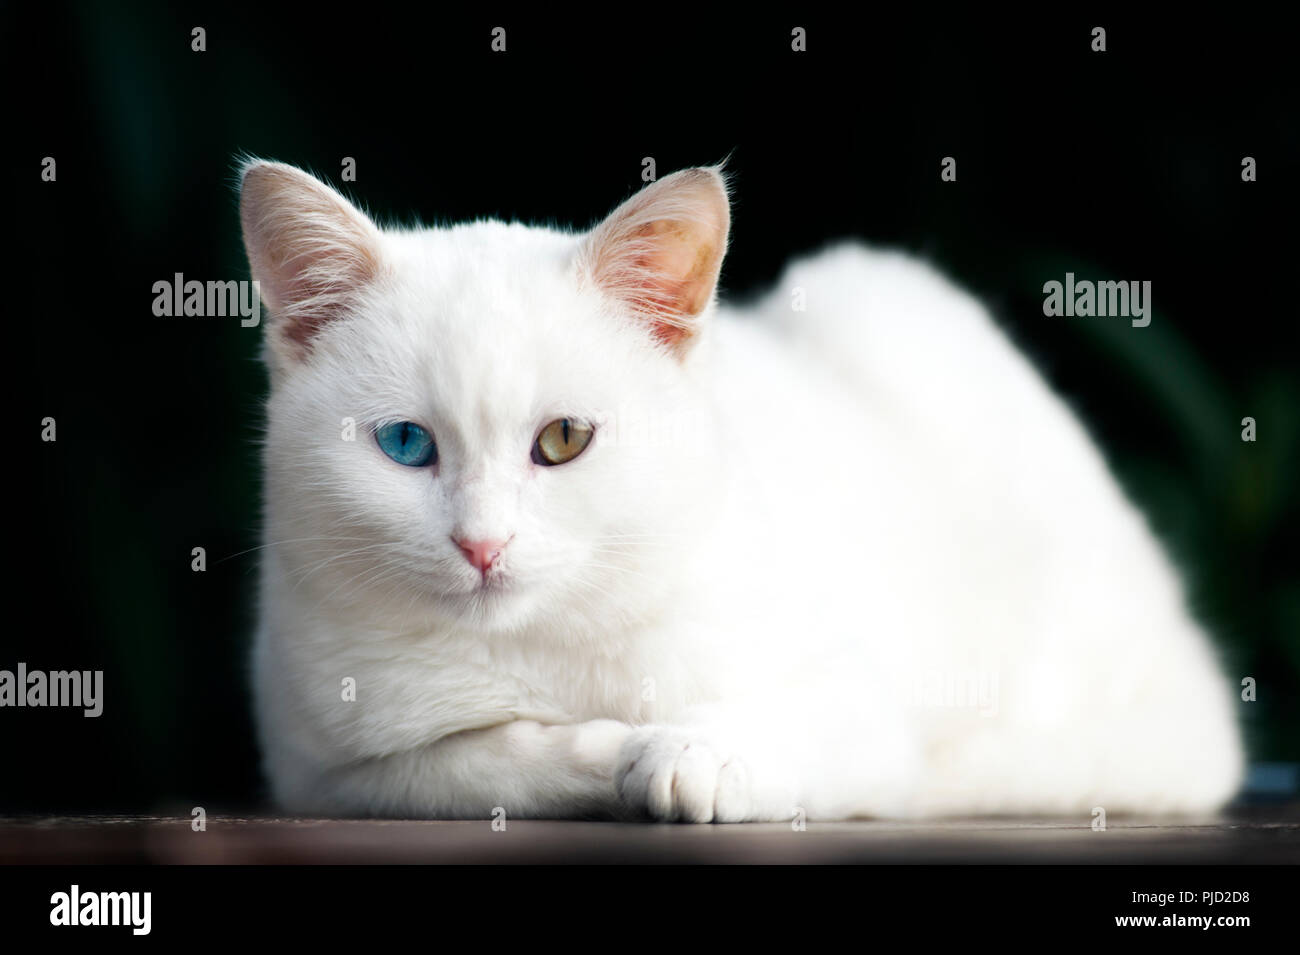 Portrait of a beautiful white odd eyed kitten against a black background Stock Photo